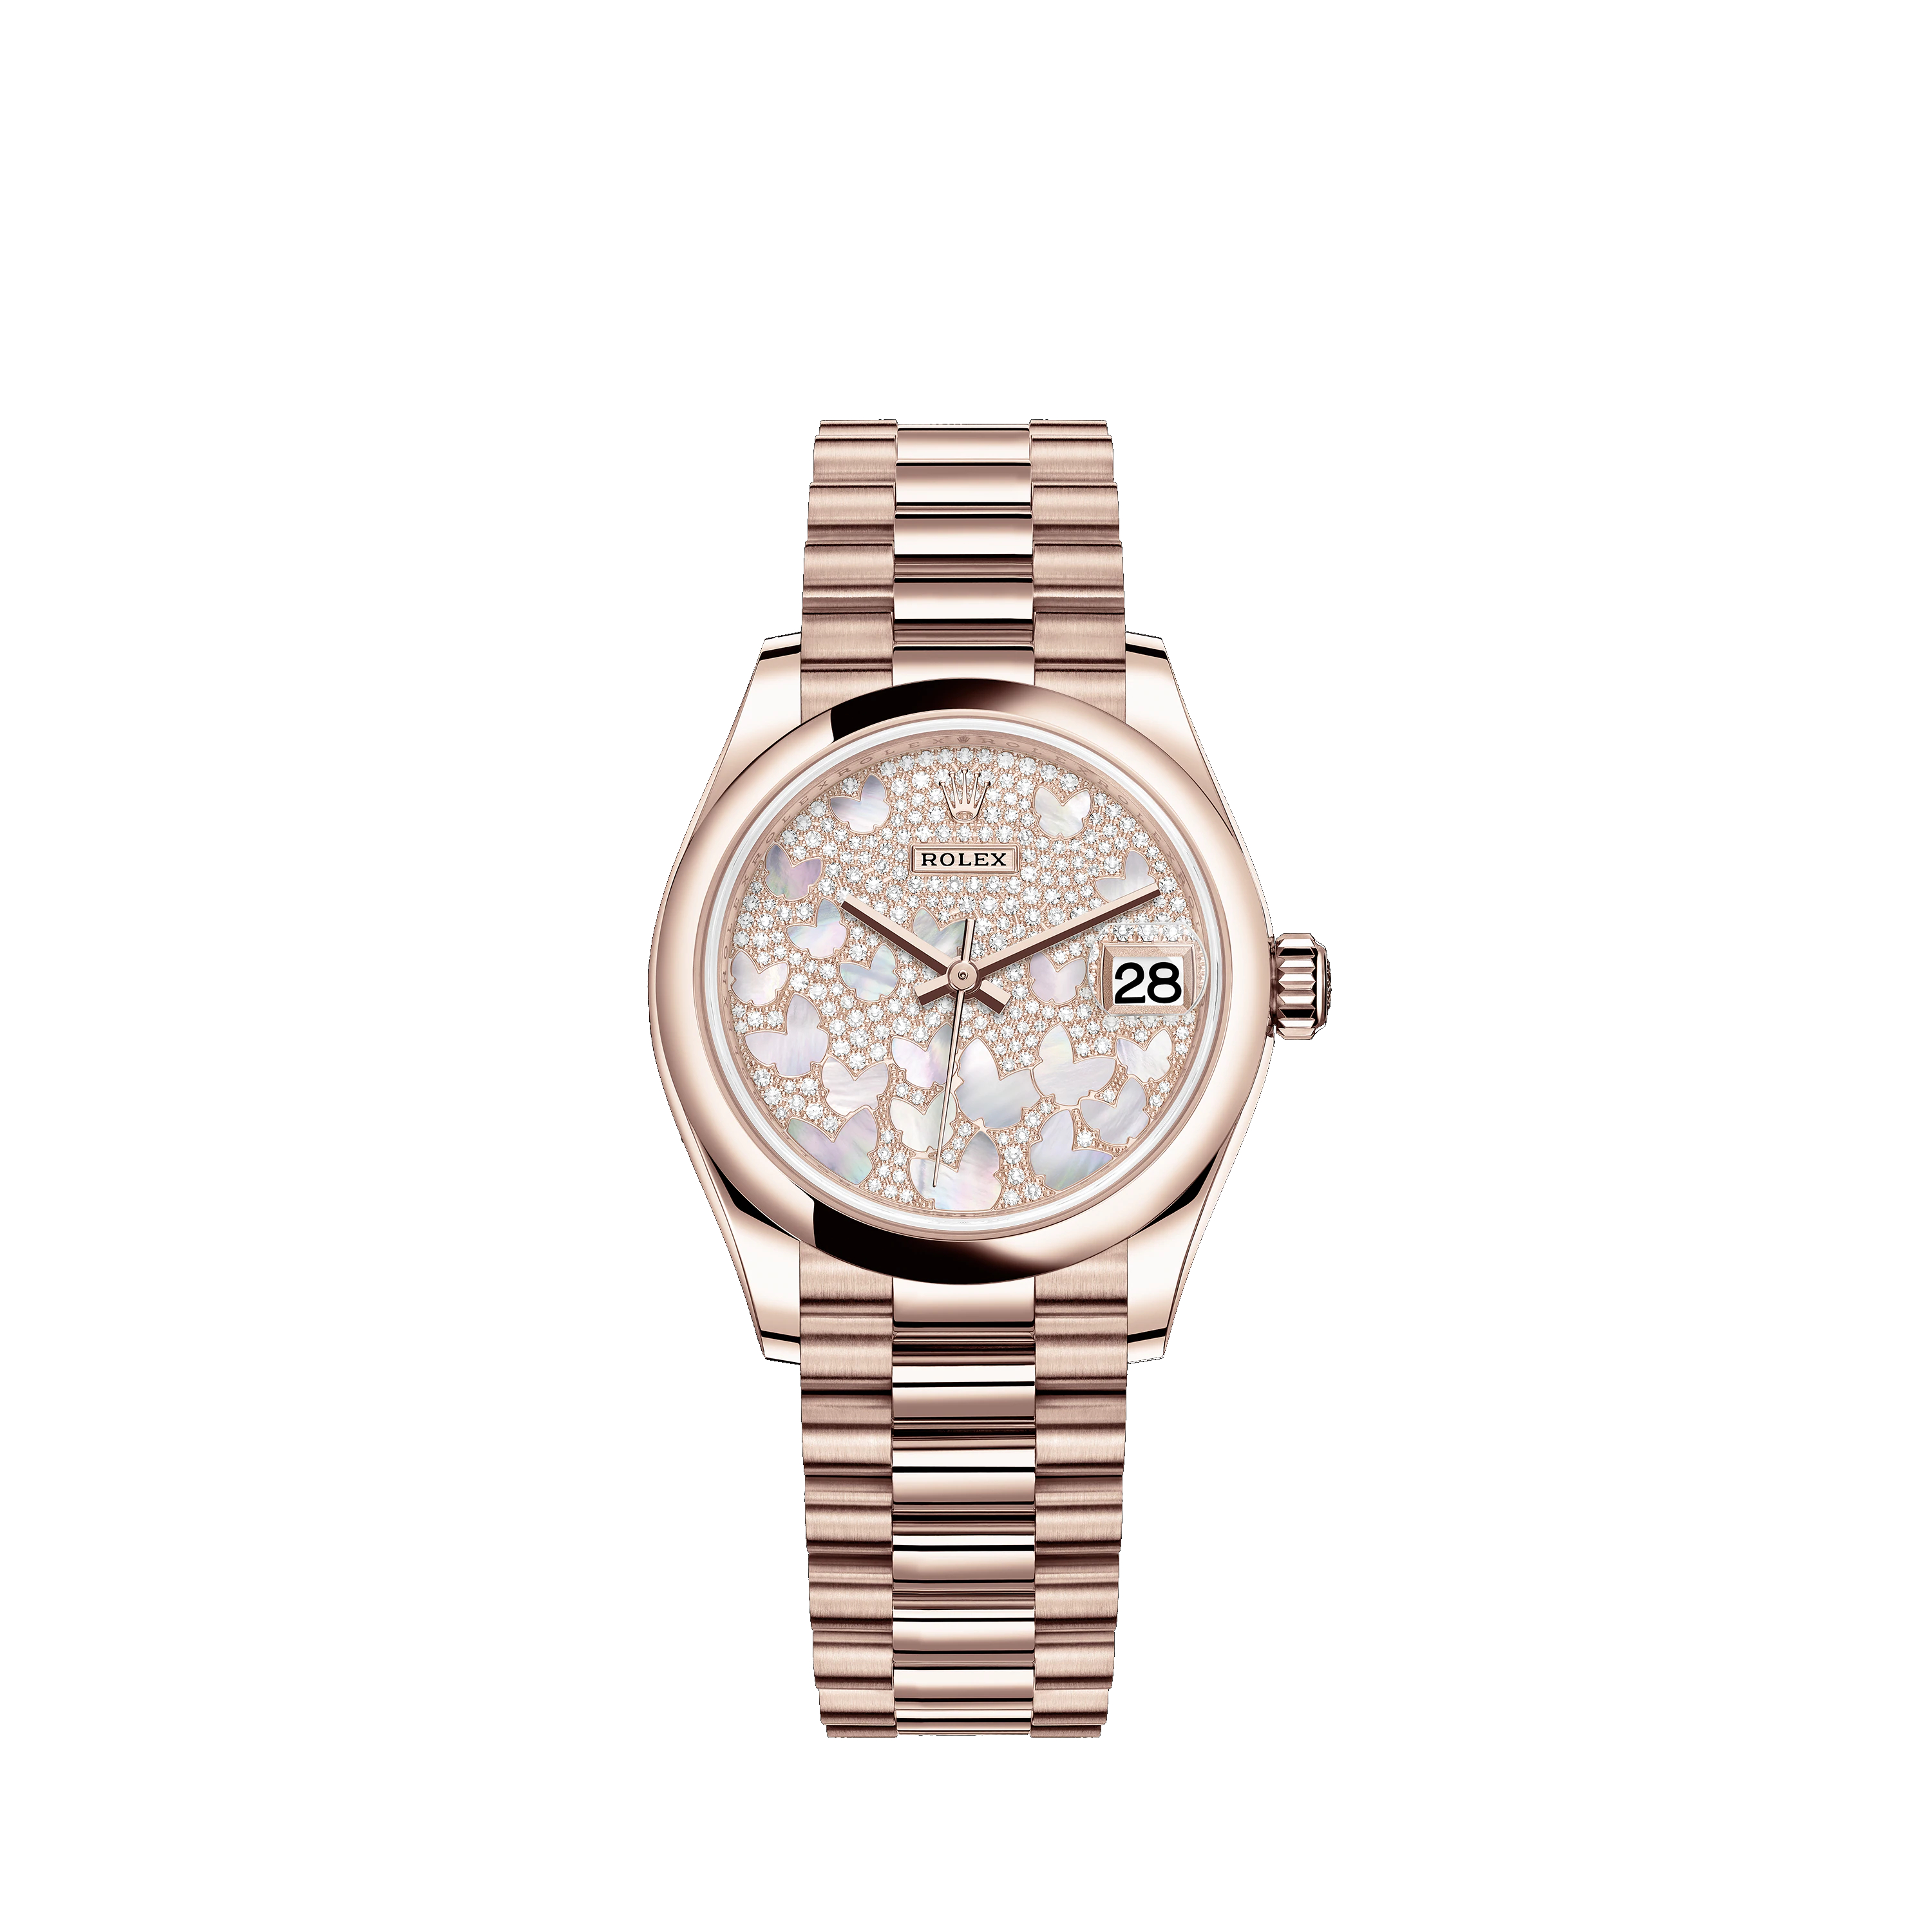 Datejust 31 278245 Rose Gold Watch (Paved, Mother-of-Pearl Butterfly)